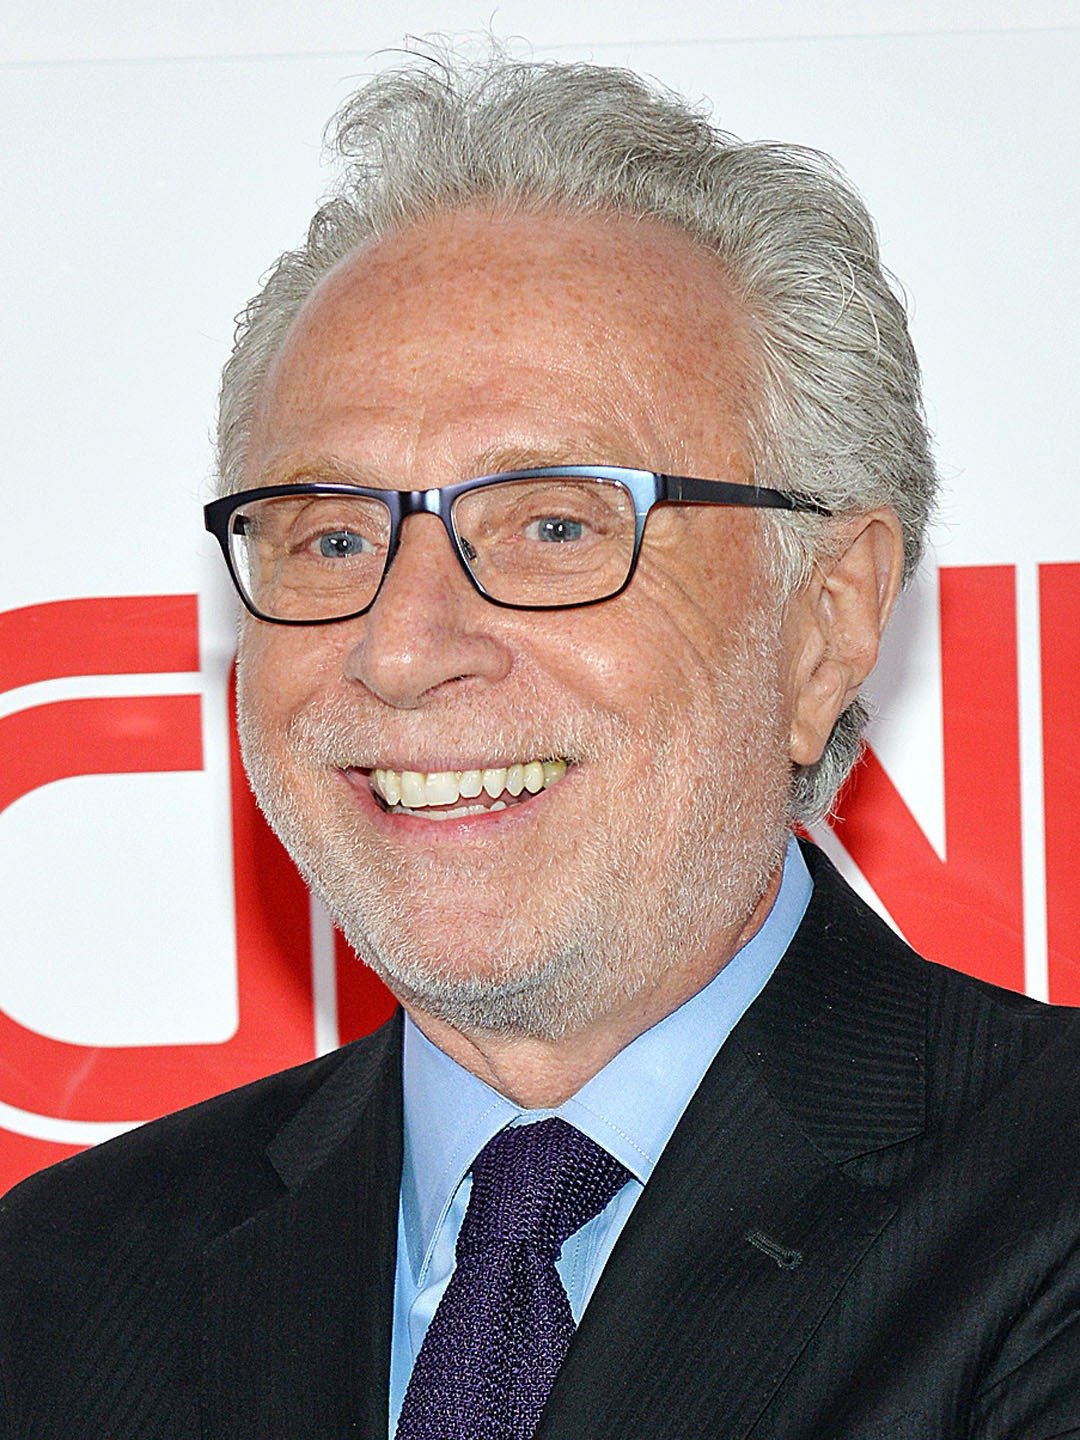 How tall is Wolf Blitzer?